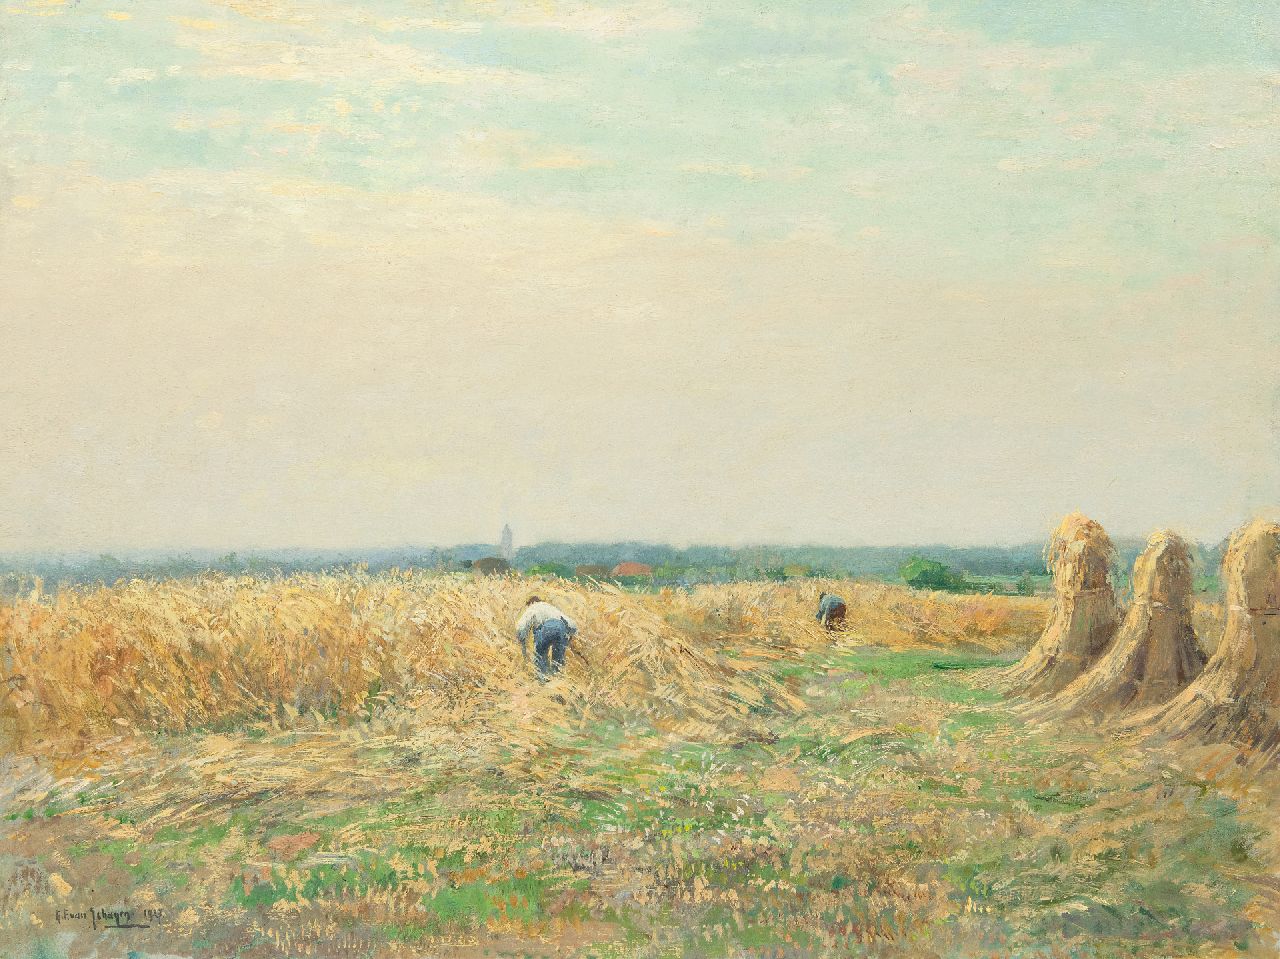 Schagen G.F. van | Gerbrand Frederik van Schagen | Paintings offered for sale | Harvest time, oil on canvas 60.5 x 80.7 cm, signed l.l. and dated 1927